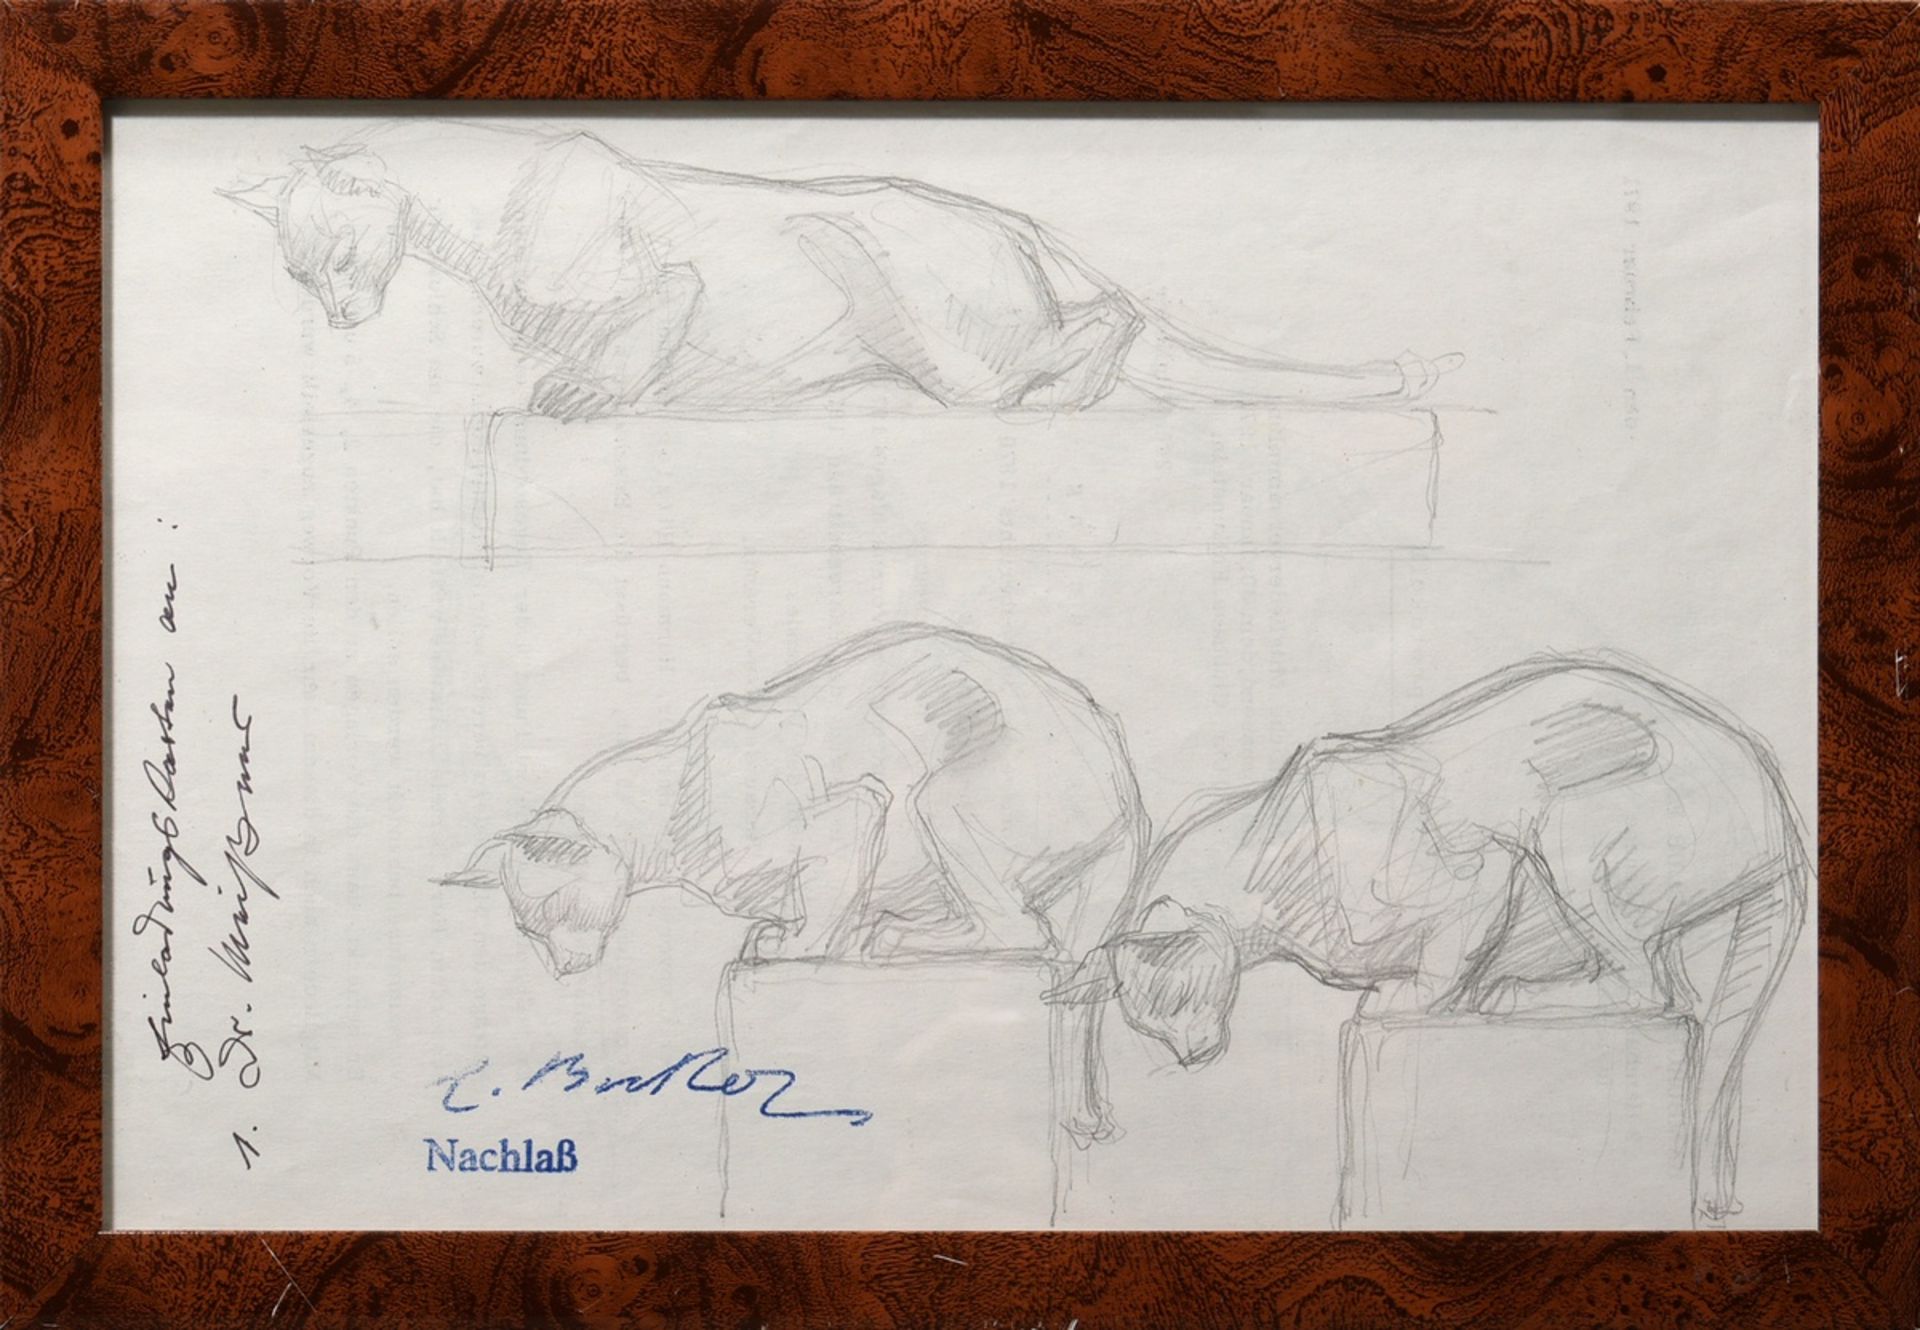 Becker, Claus Georg (1902-1983) "Cats", pencil study on letterhead of the Hamburger Golf-Club e.V.  - Image 2 of 3